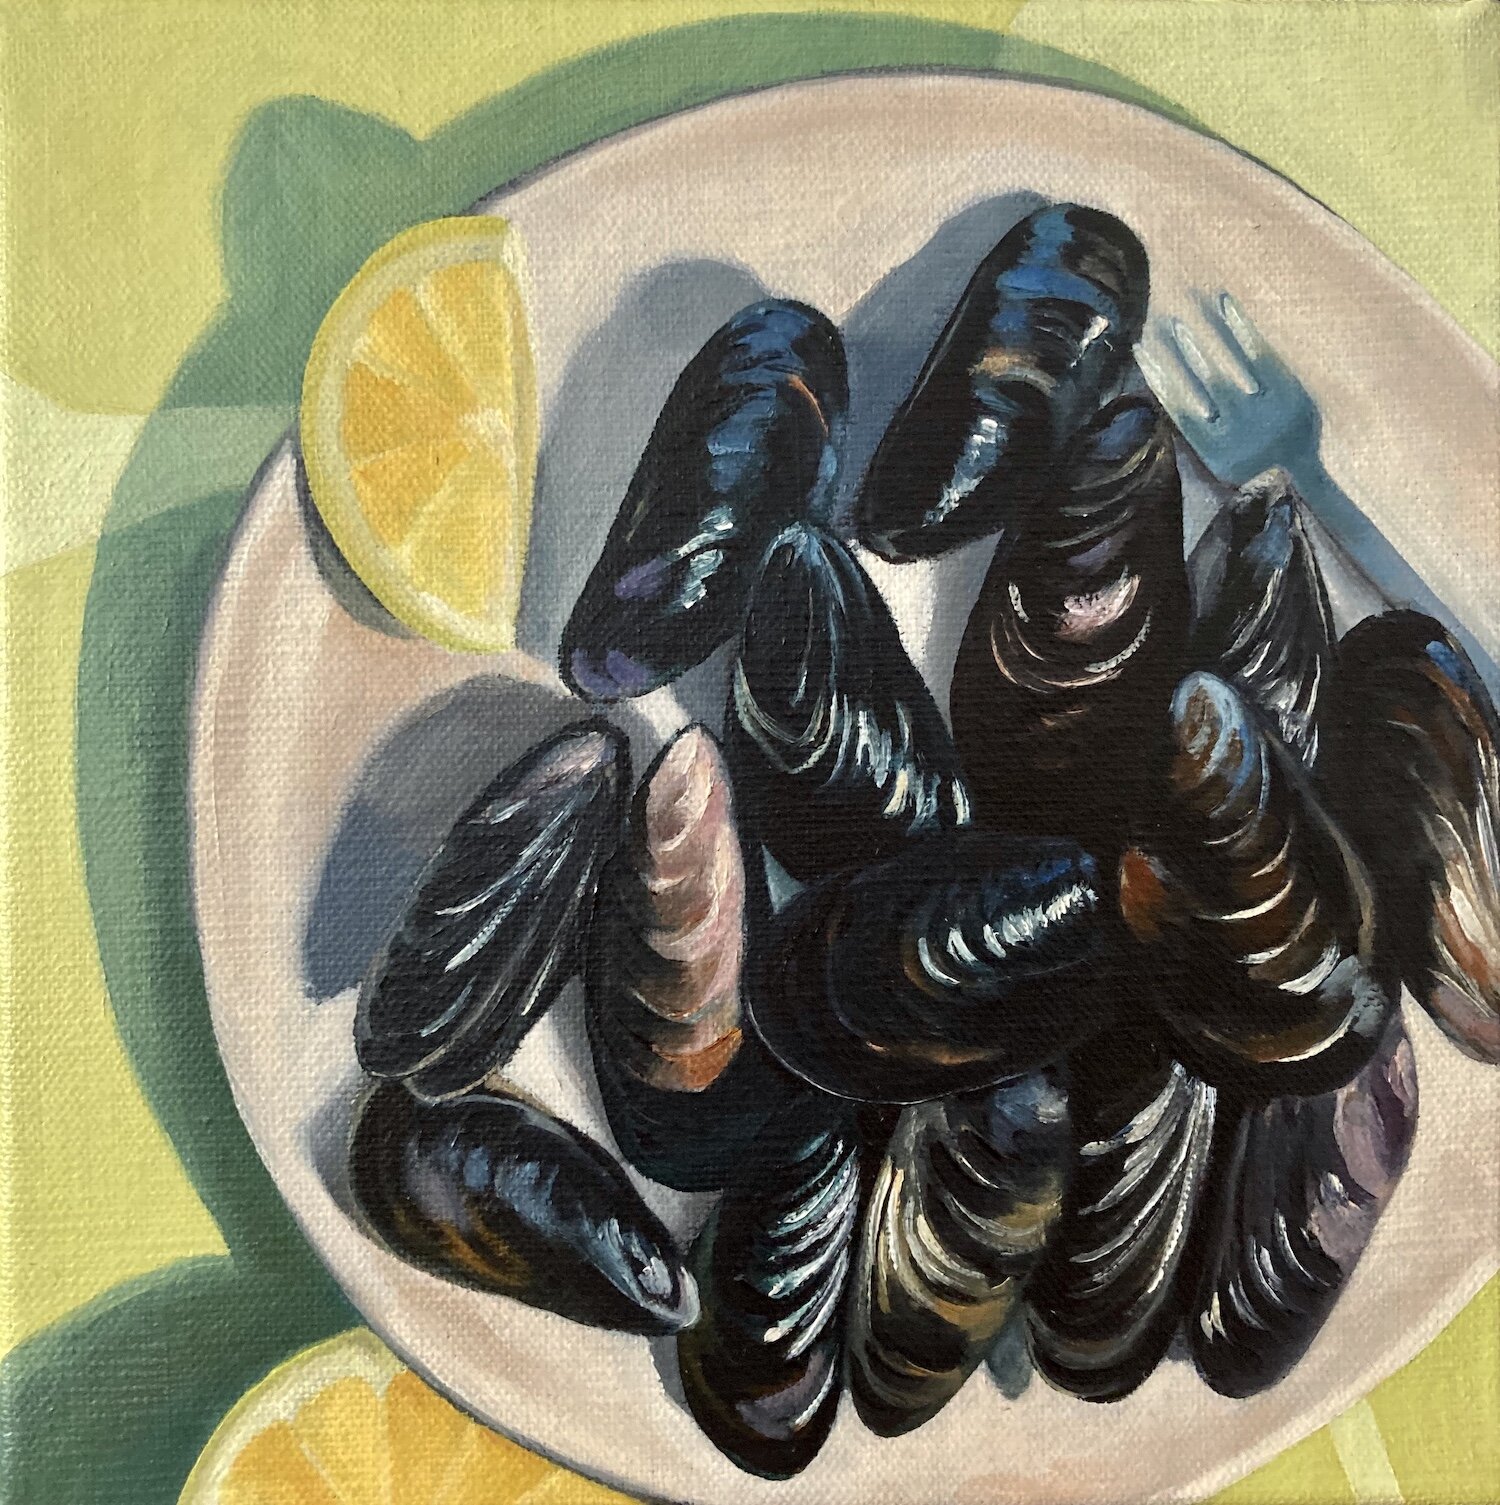 Plate of Mussels